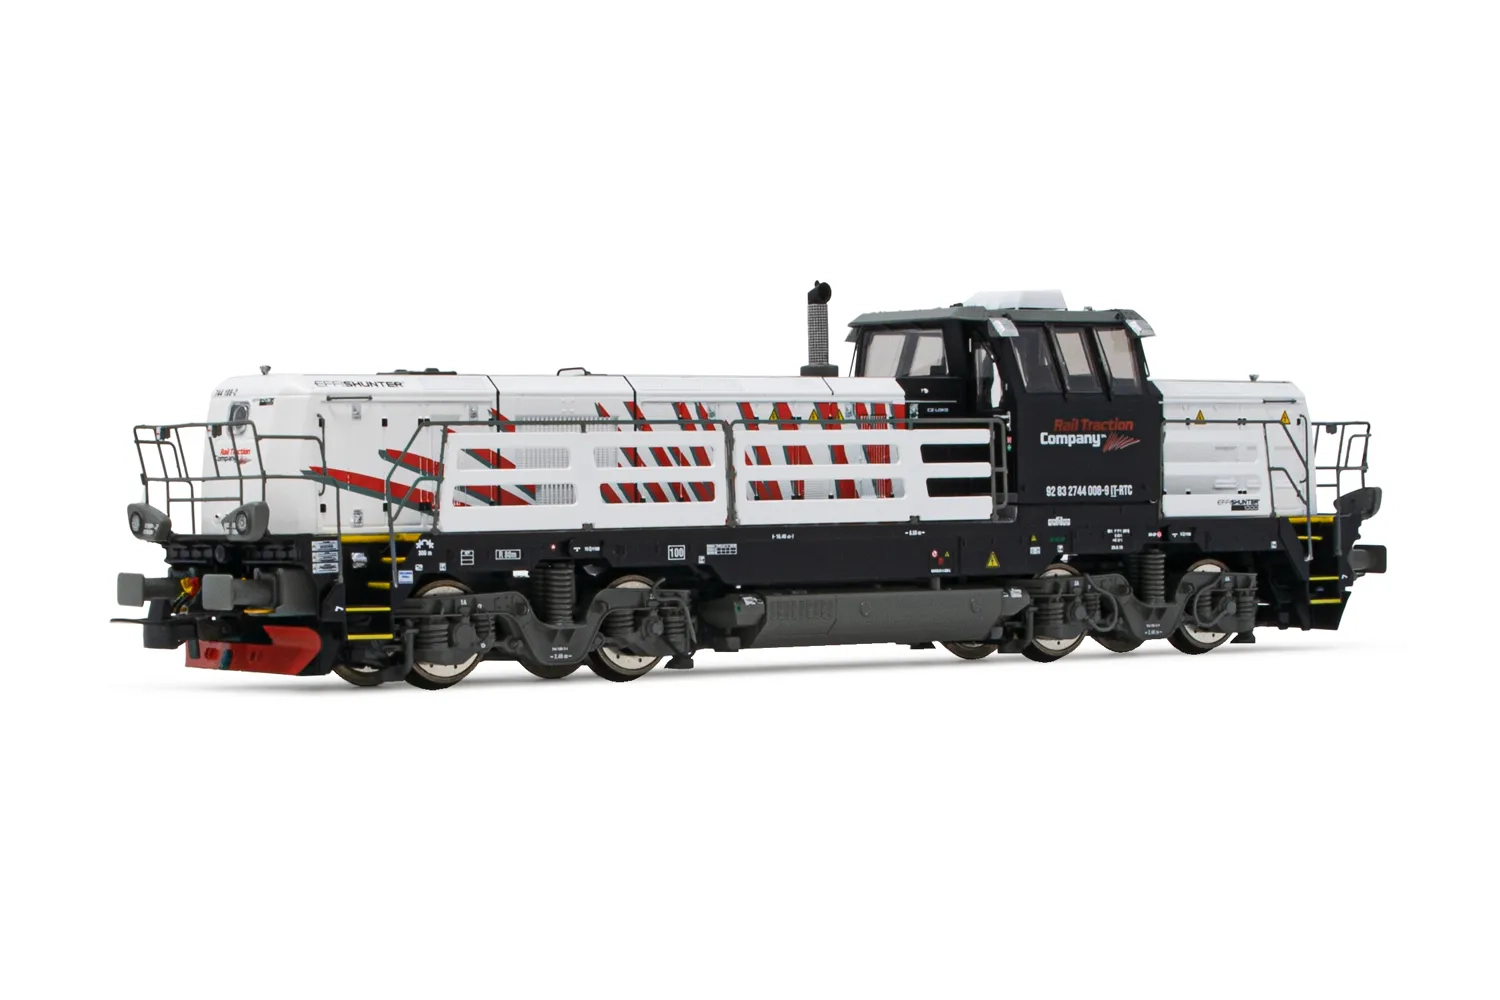 Rail Traction Company, white/black livery with red stripes, DCC Sound